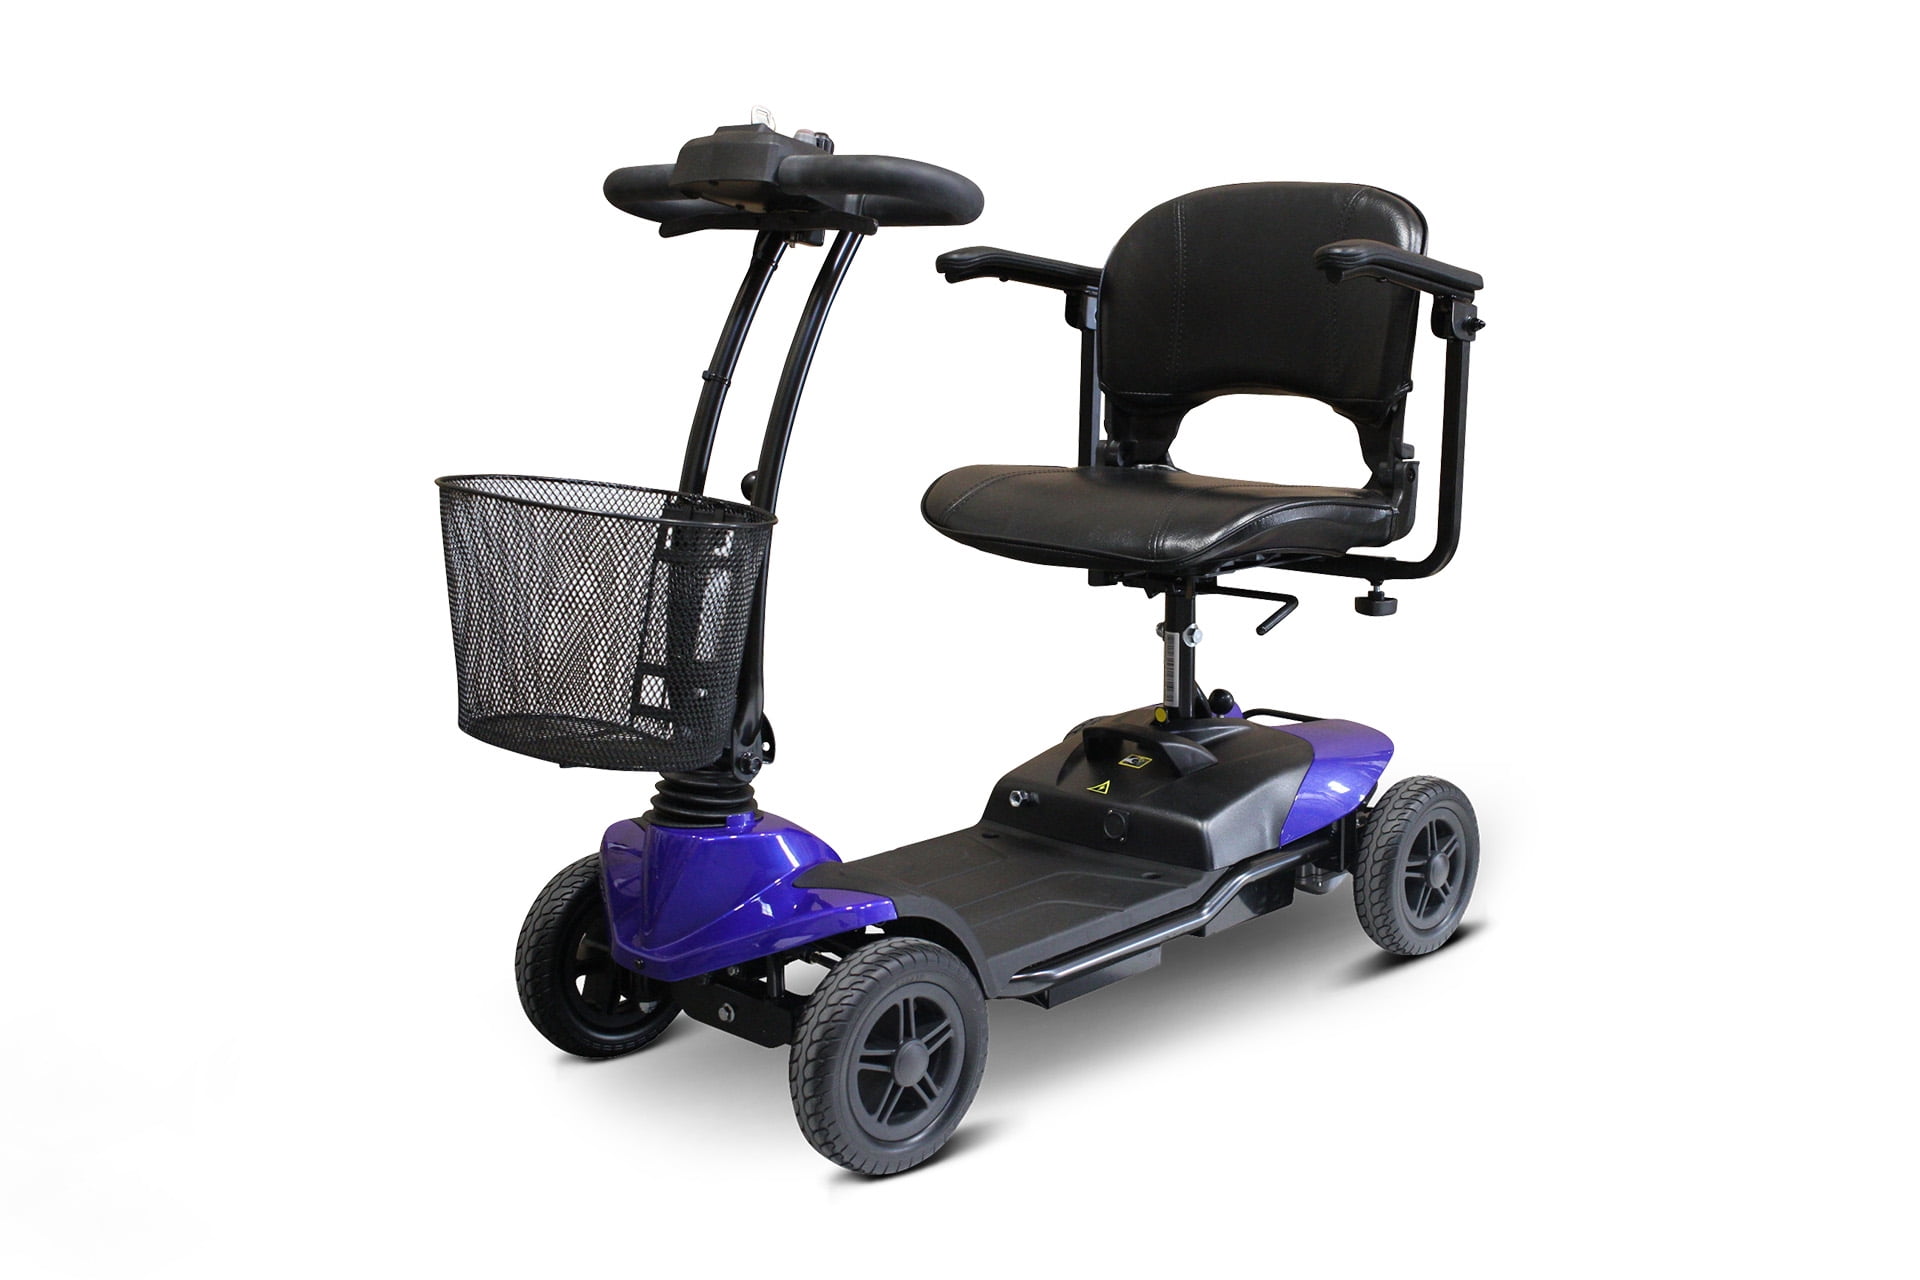 EWheels Medical Lightweight 4 Wheel Portable Mobility Scooter - Blue